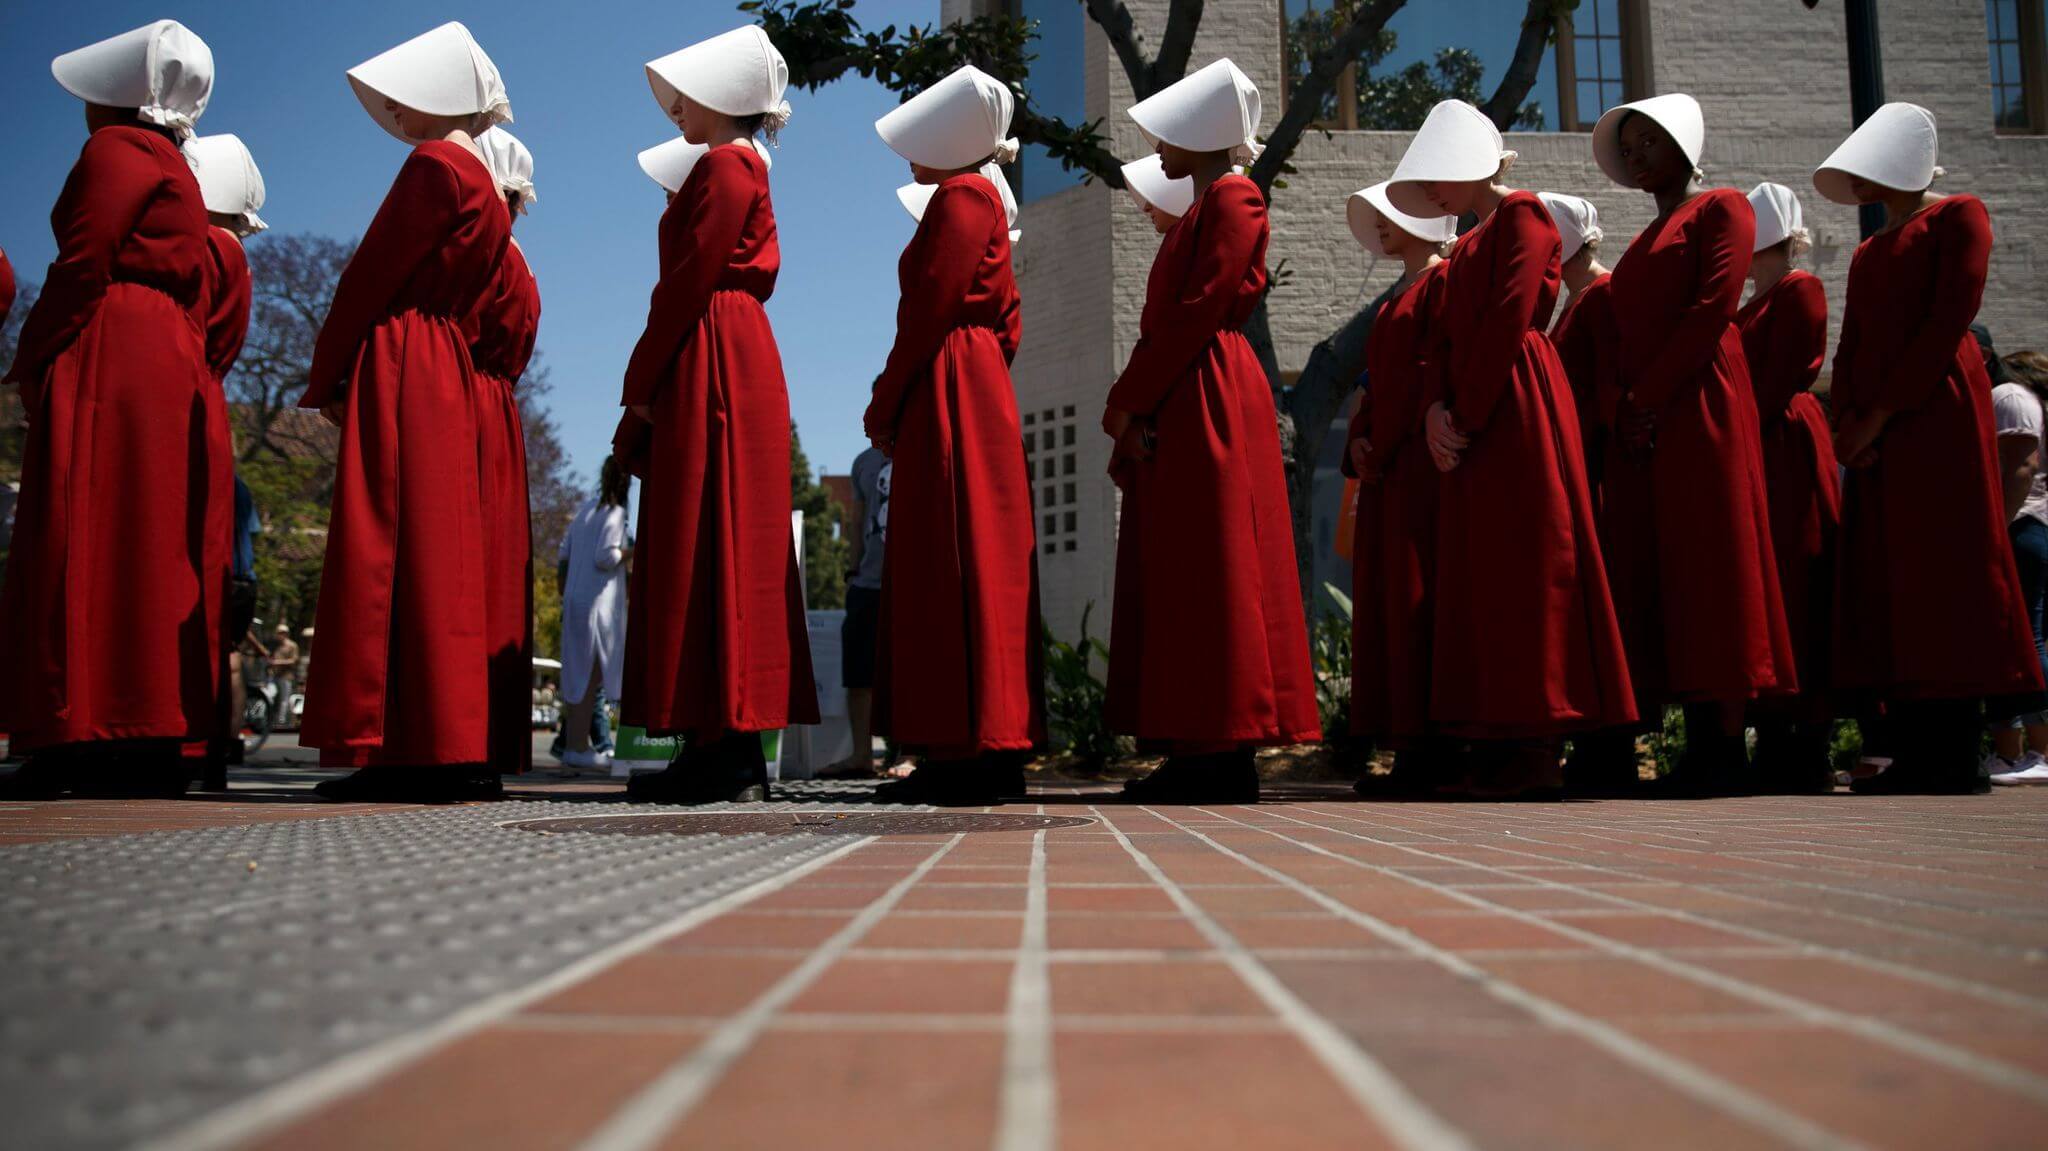 How the Handmaid’s Tale Sheds Light on Our Own Dysfunctional Relationships